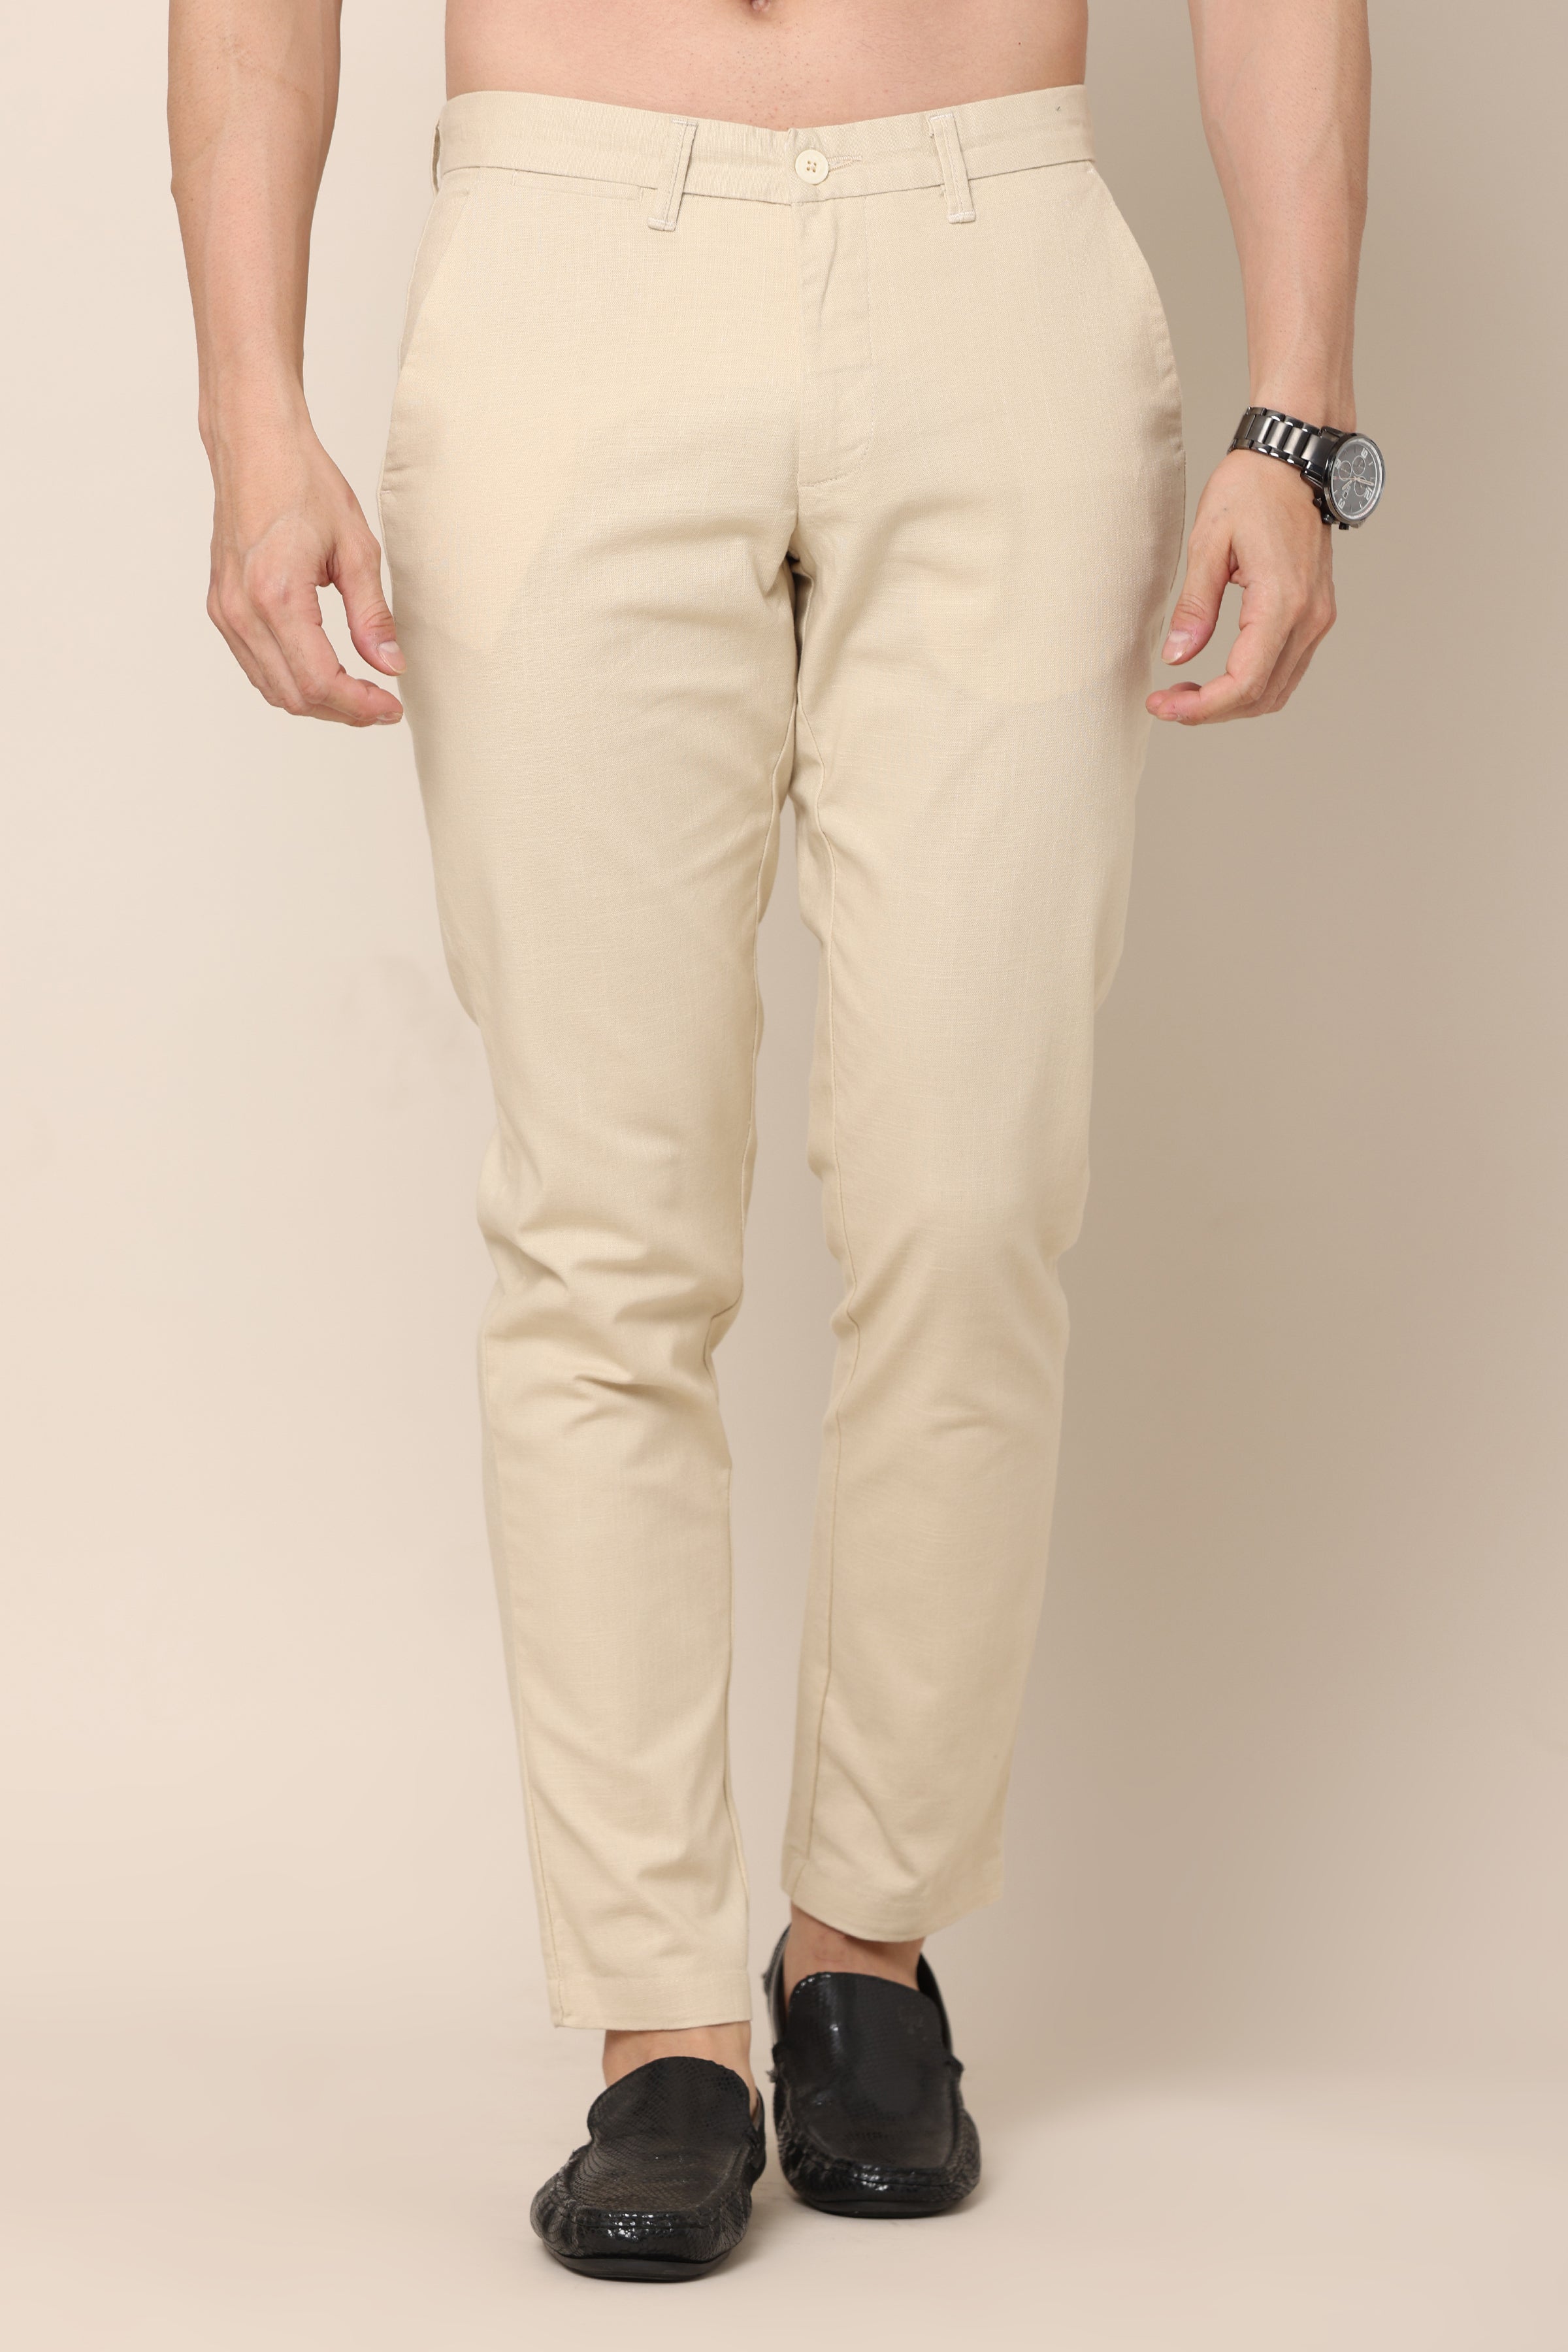 Cream Solid Polyester Cotton Men Slim Fit Formal Trousers - Selling Fast at  Pantaloons.com